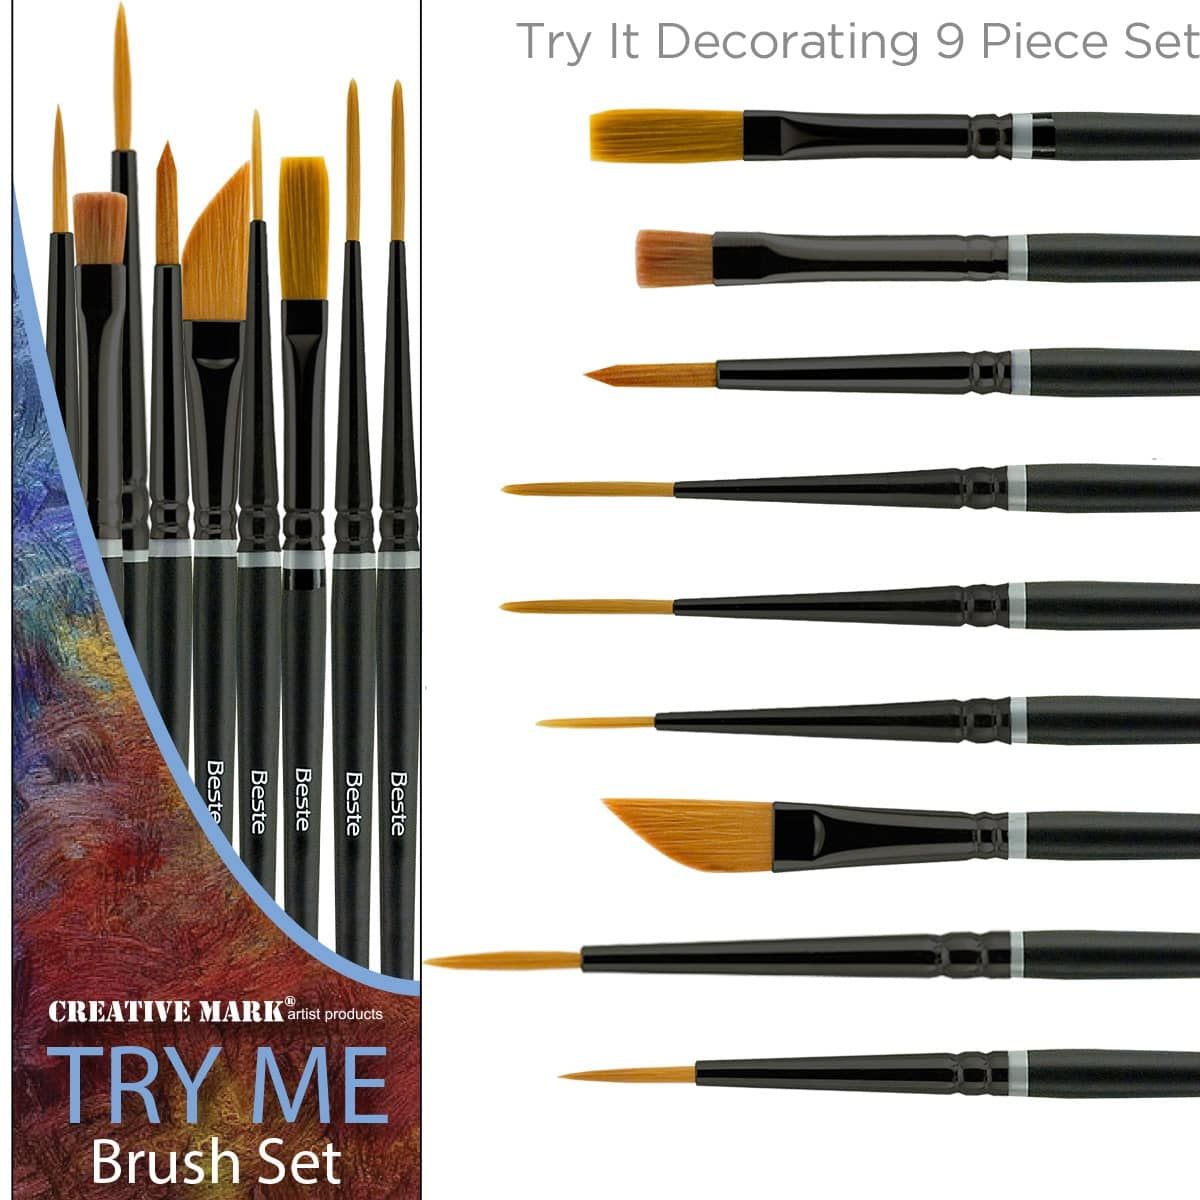 Try It Set of Beste Brushes for Decorating 9pc